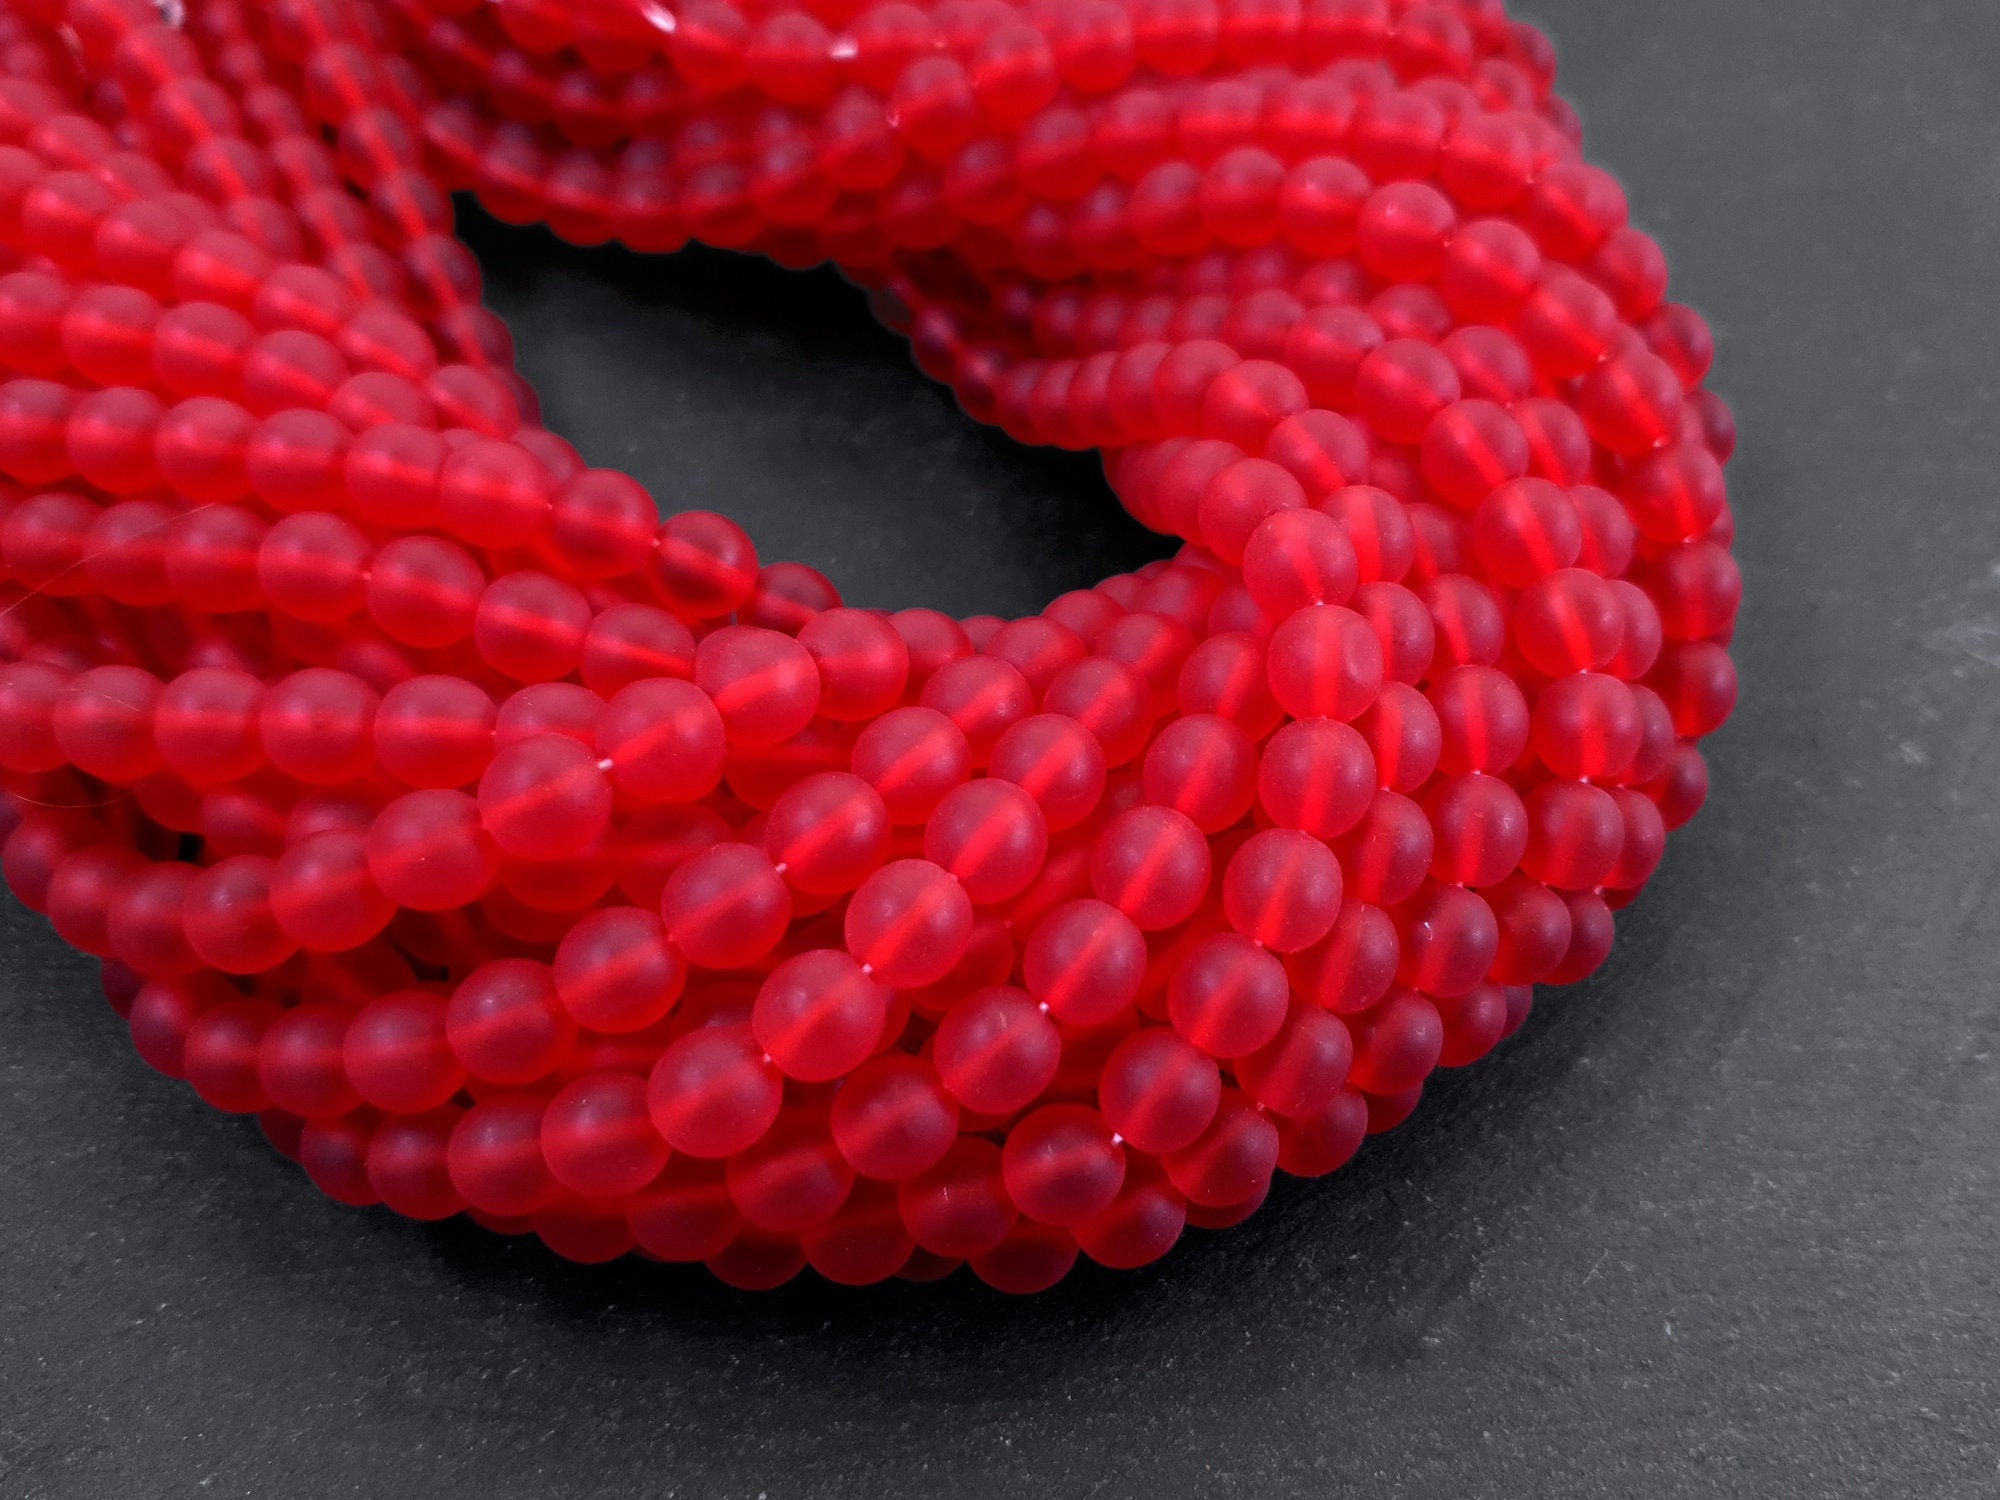 8mm Red Frosted Round Glass Beads, Matte Czech Loose Smooth Beads, 50 beads per strand, Full 16 inch Strand